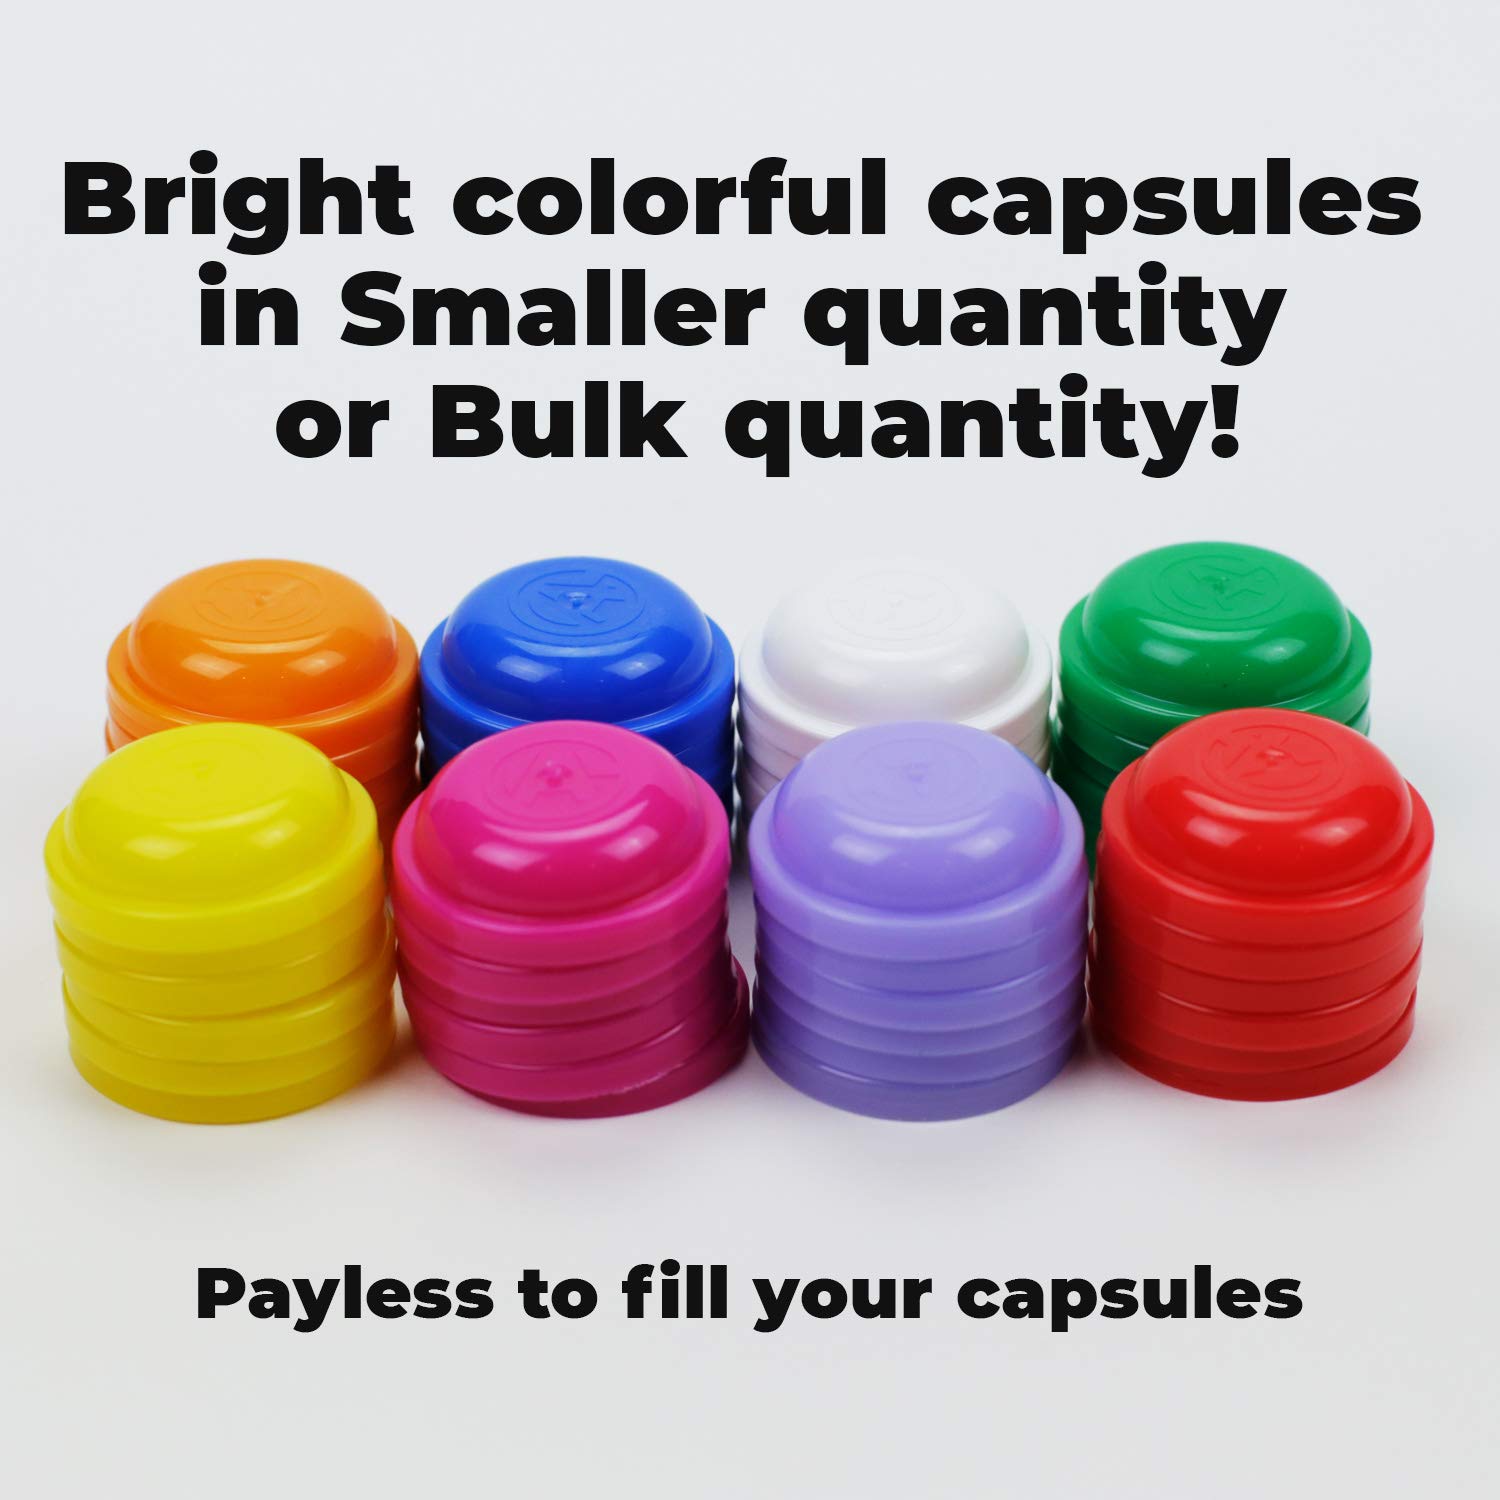 Vending Machine Capsules - 1.1 Inch Tiny Frosty Clear-Colored Acorn Capsules - 50 Pcs Empty Toy Capsules - 8 Colors Plastic Capsules for Toys - 28 mm Prize Machine Capsules - Small Colored Containers